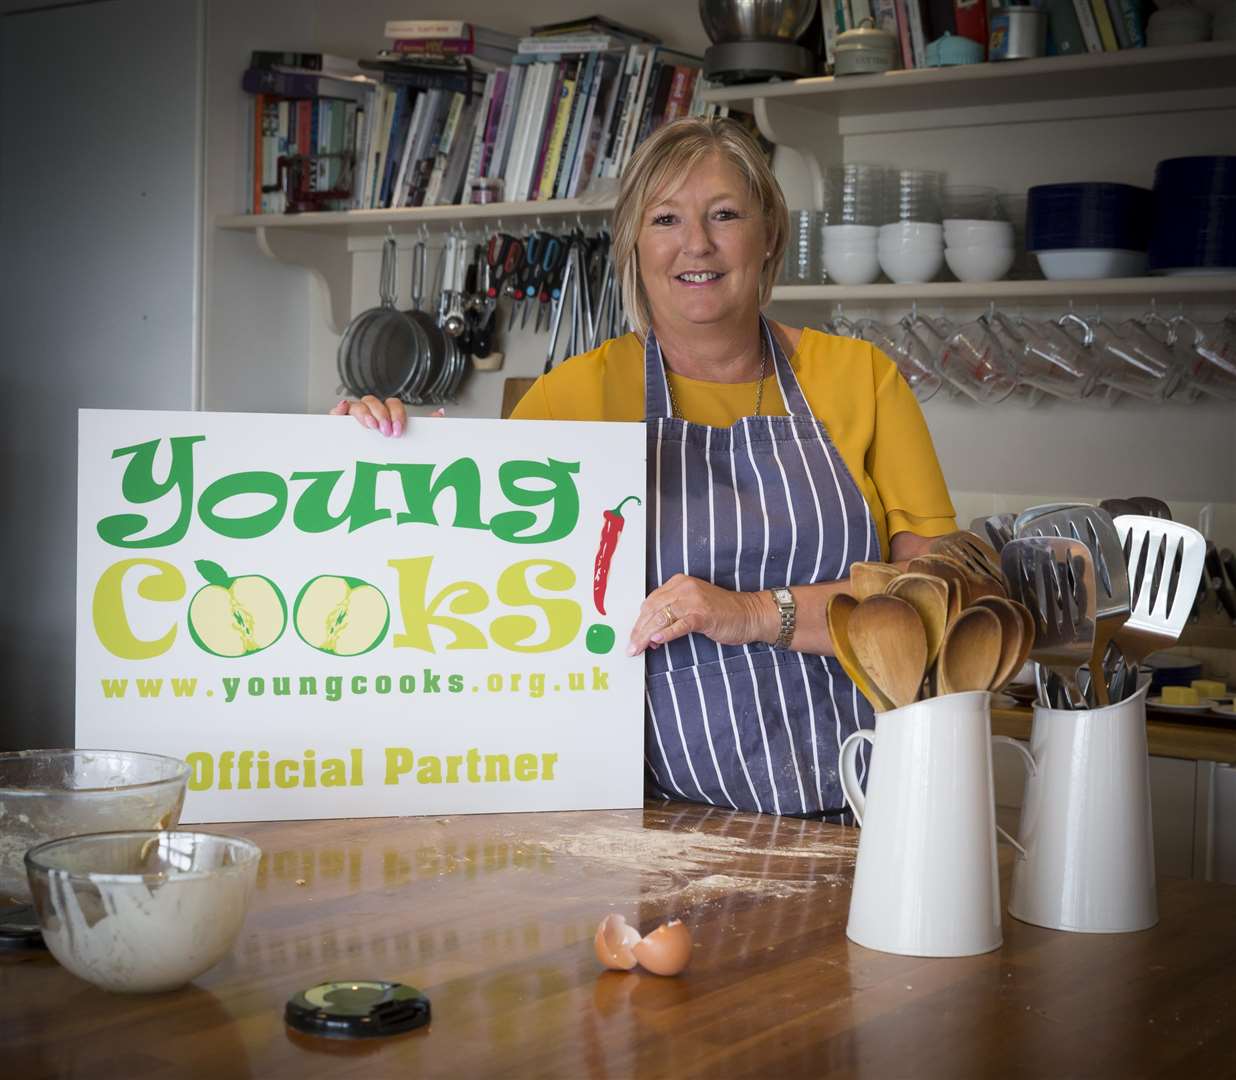 Julia Hallett of Whole School Meals, which is supporting the Young Cooks contest.